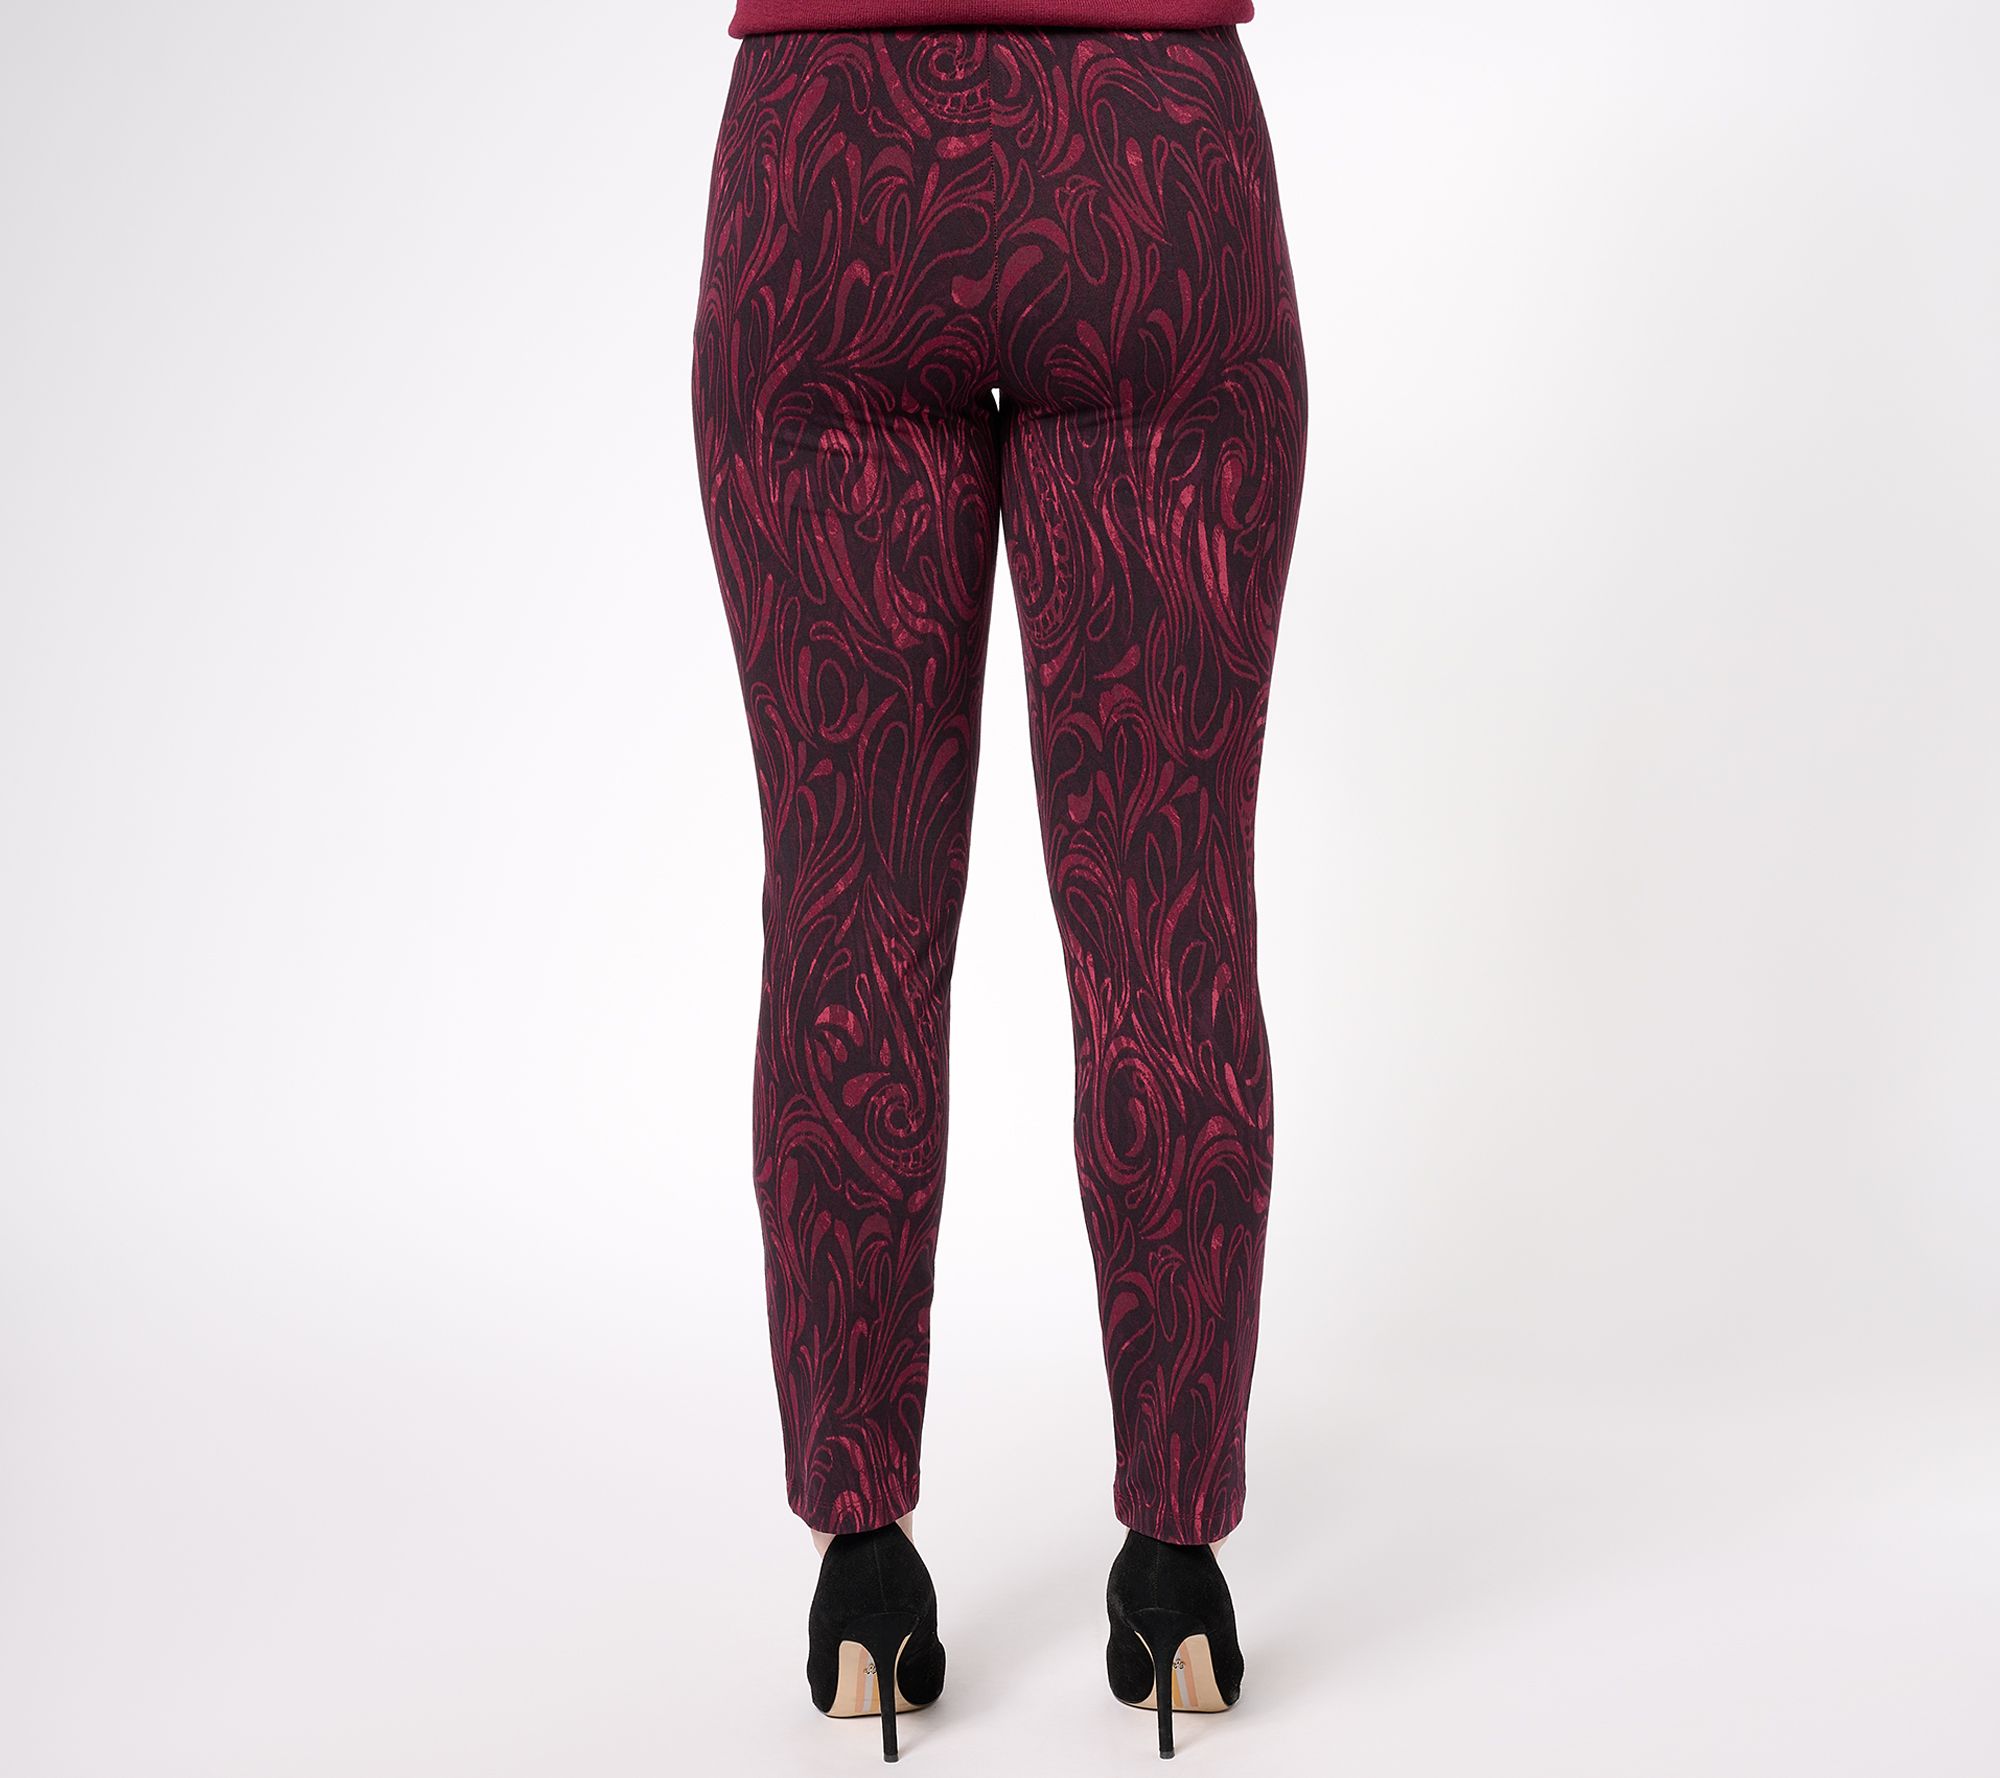 AVA Legging  Running & Yoga Legging - Recycled and recyclable